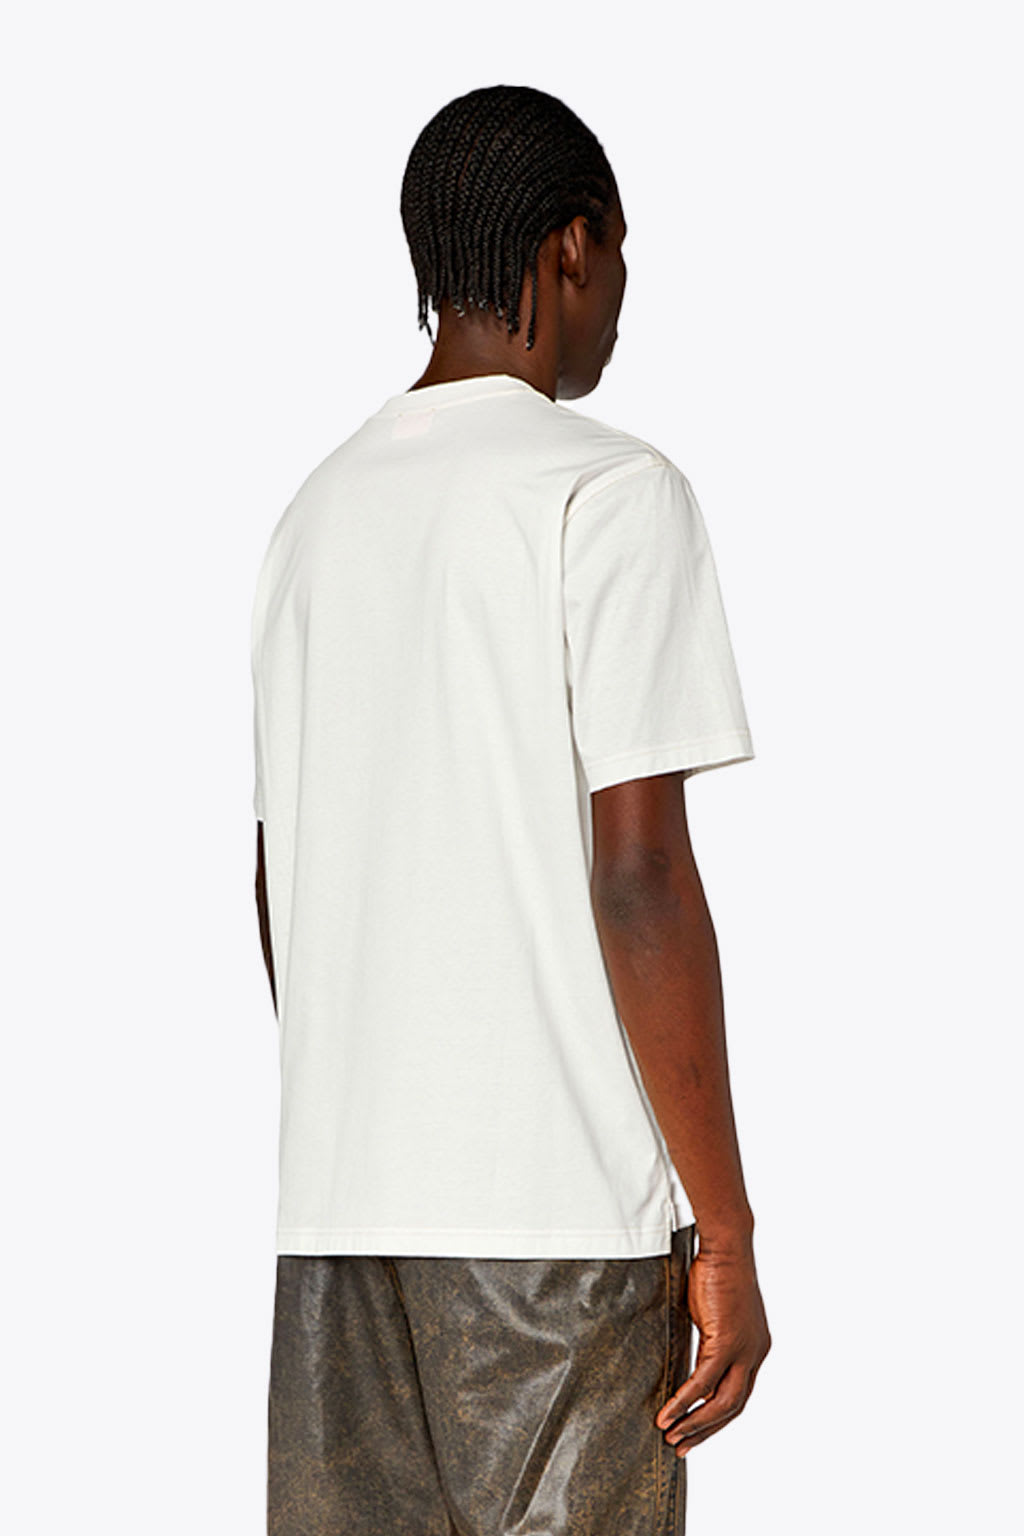 Shop Diesel T-must-slits-n2 White Cotton T-shirt With Tonal Print - T Must Slits N2